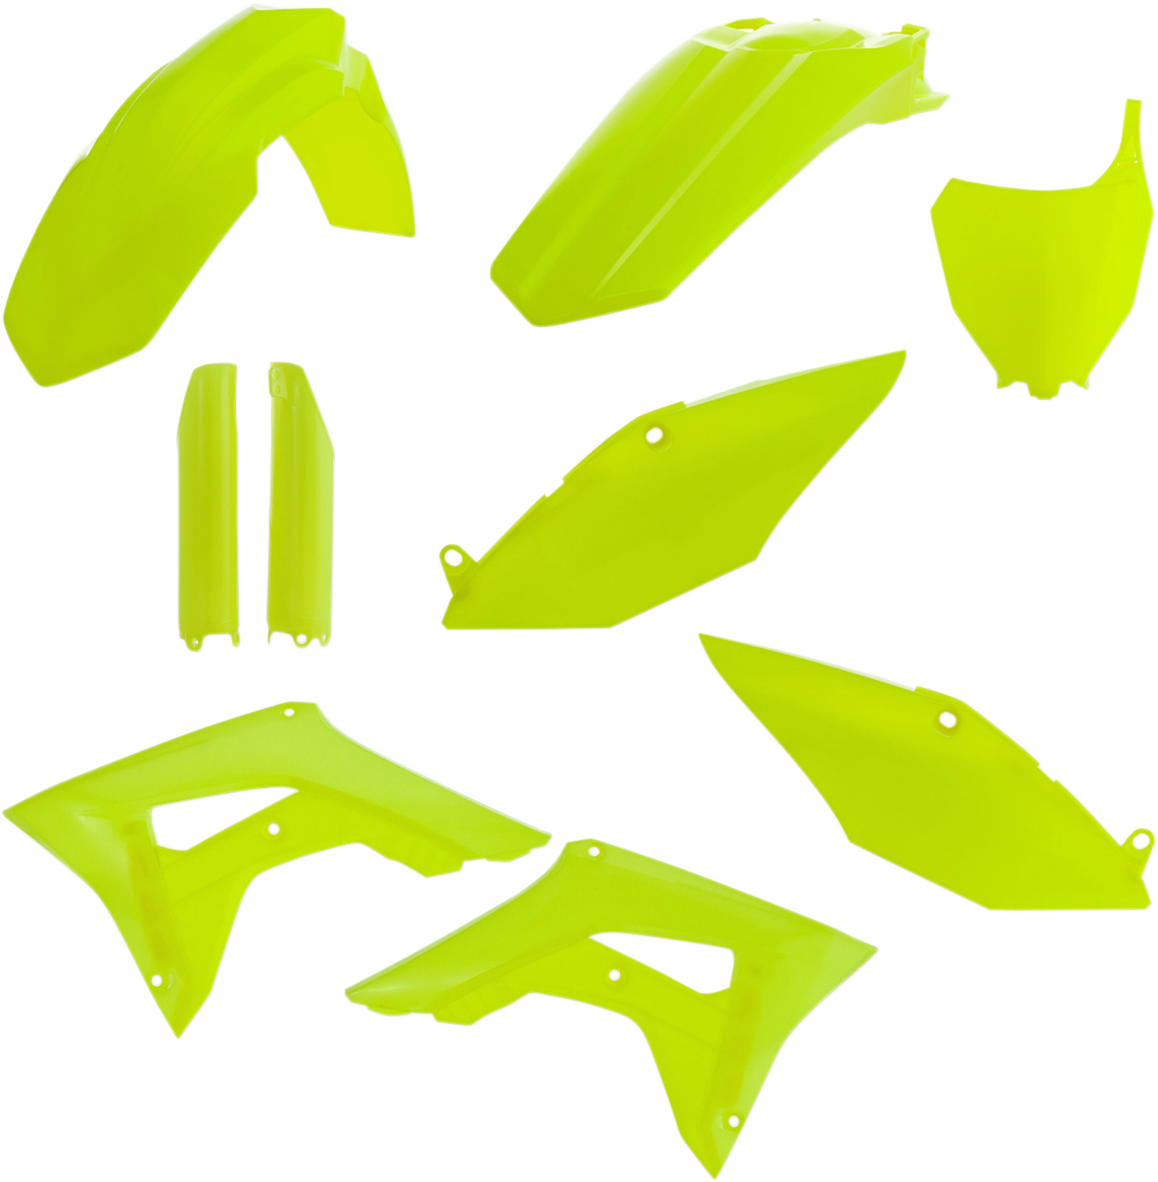 ACERBIS Full Replacement Body Kit - Fluorescent Yellow 2630704310